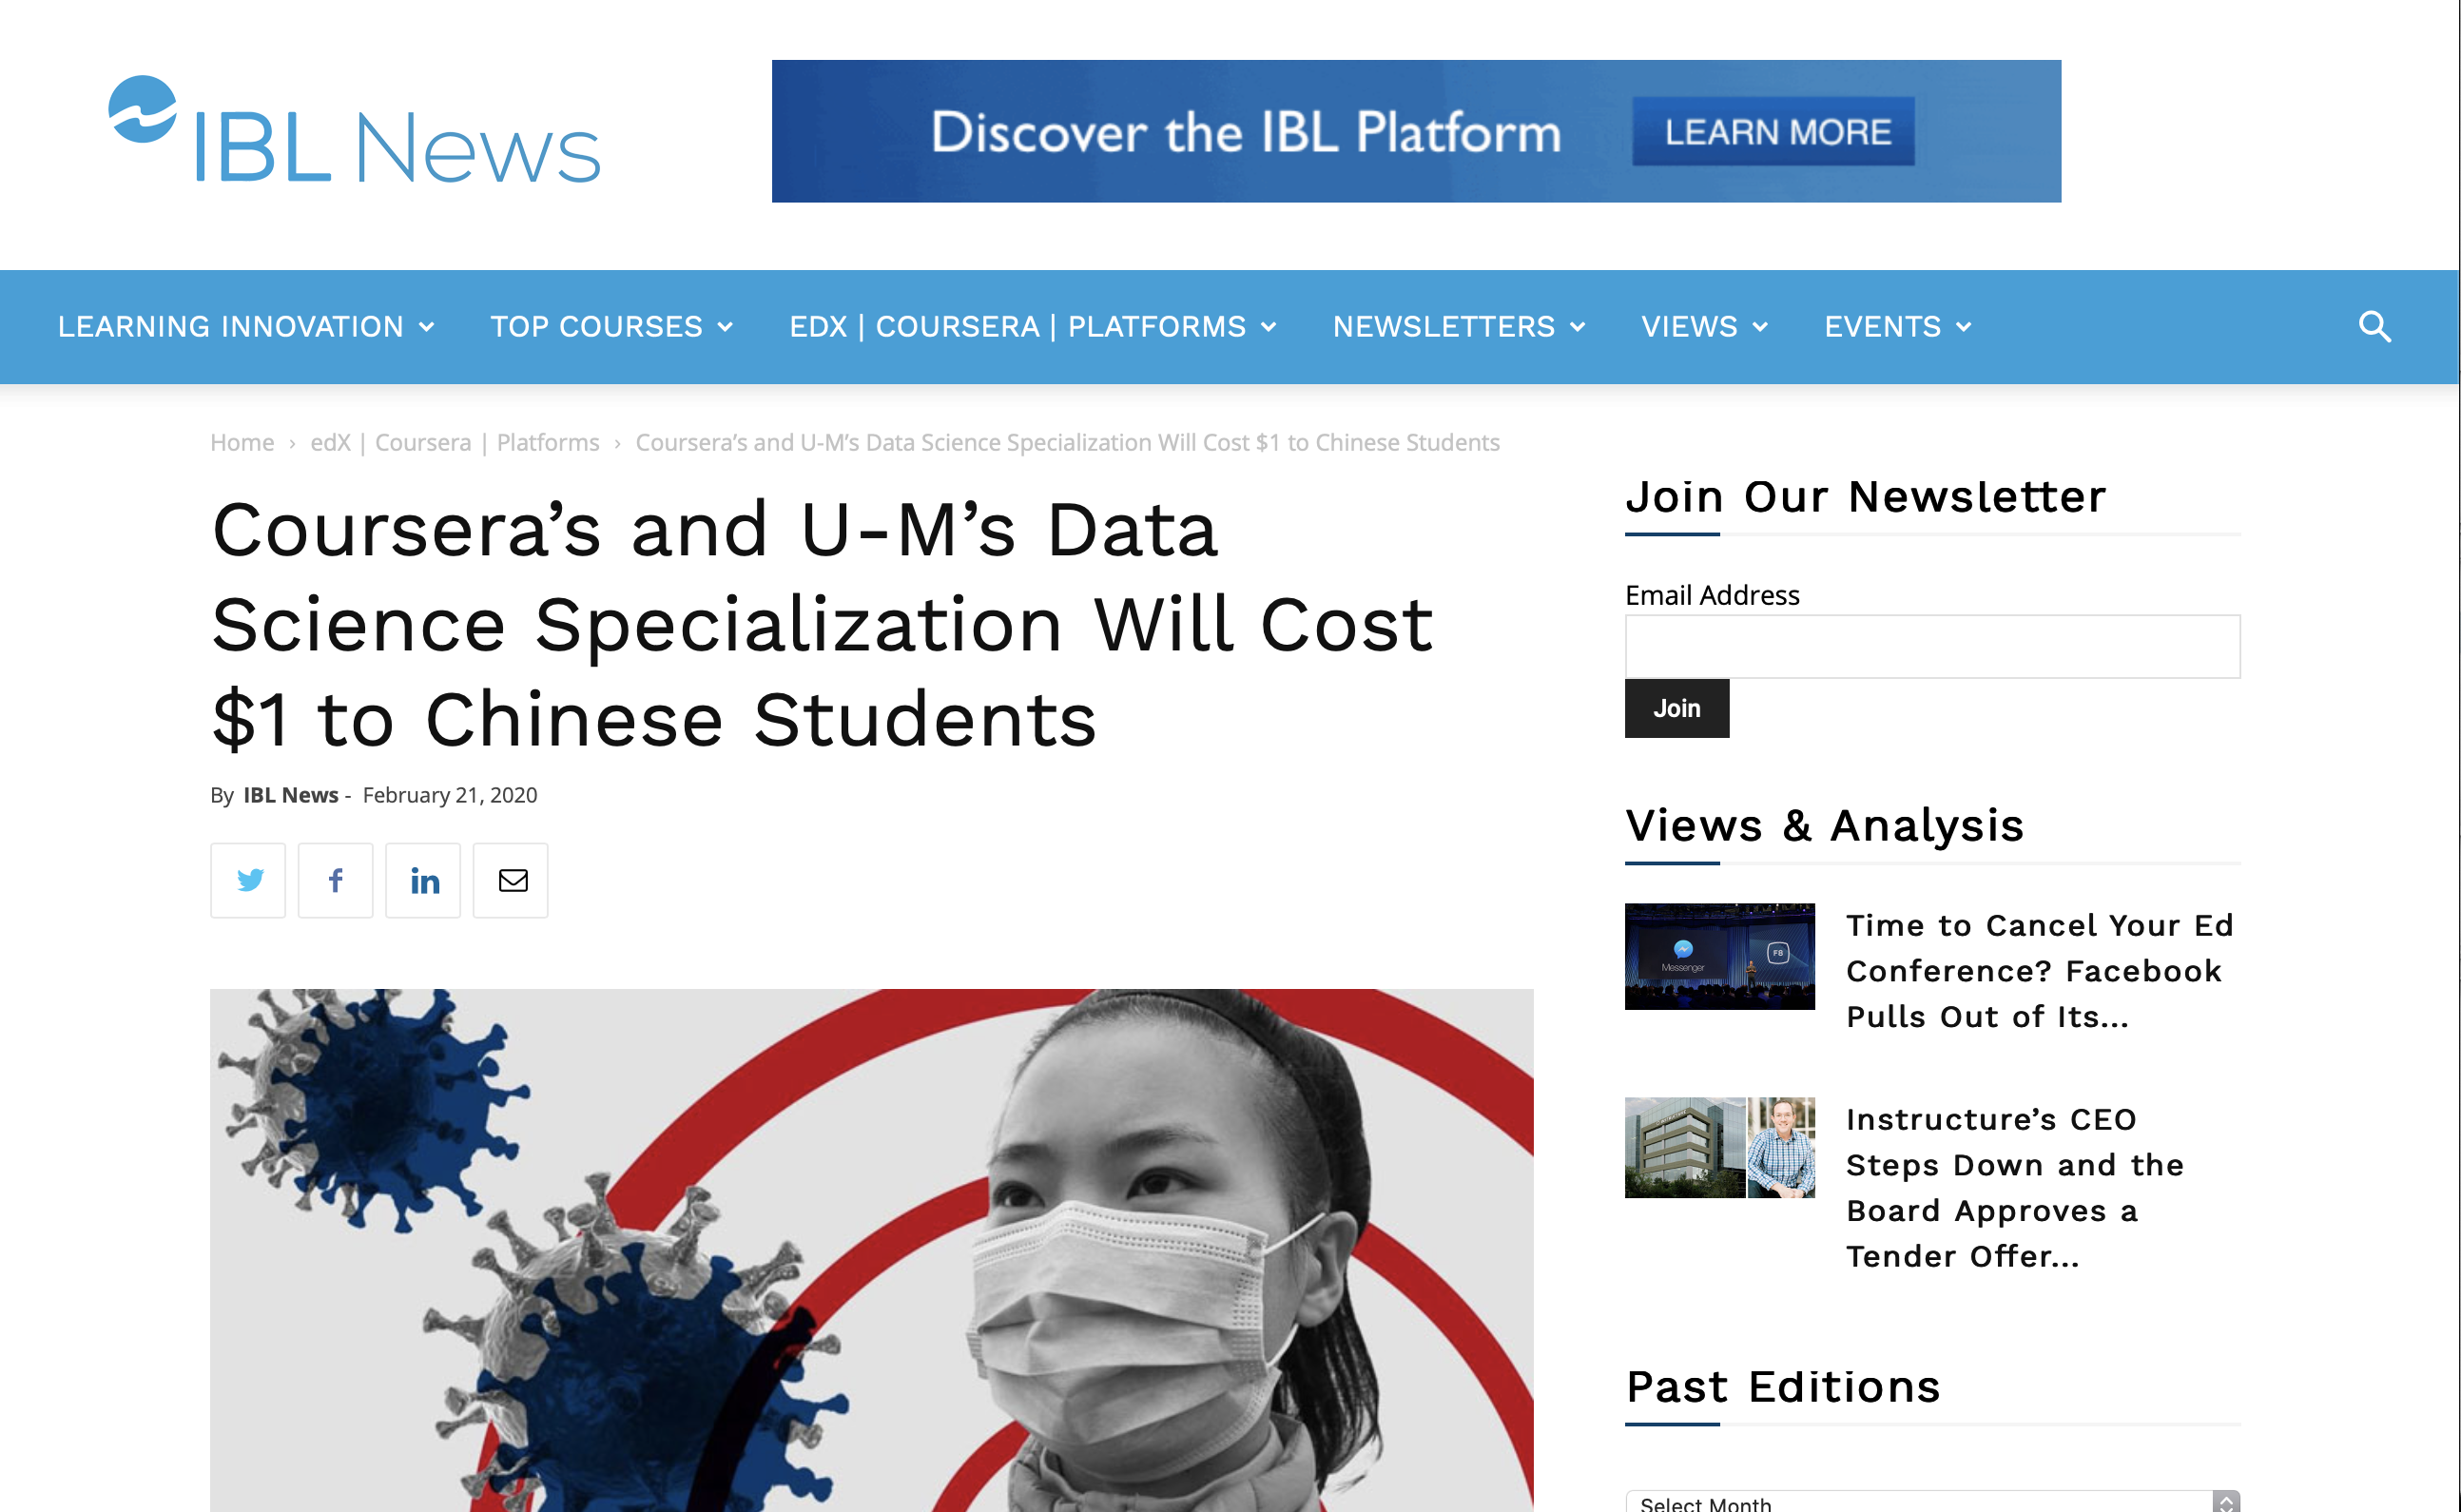 Coursera’s and U-M’s Data Science Specialization Will Cost $1 to Chinese Students